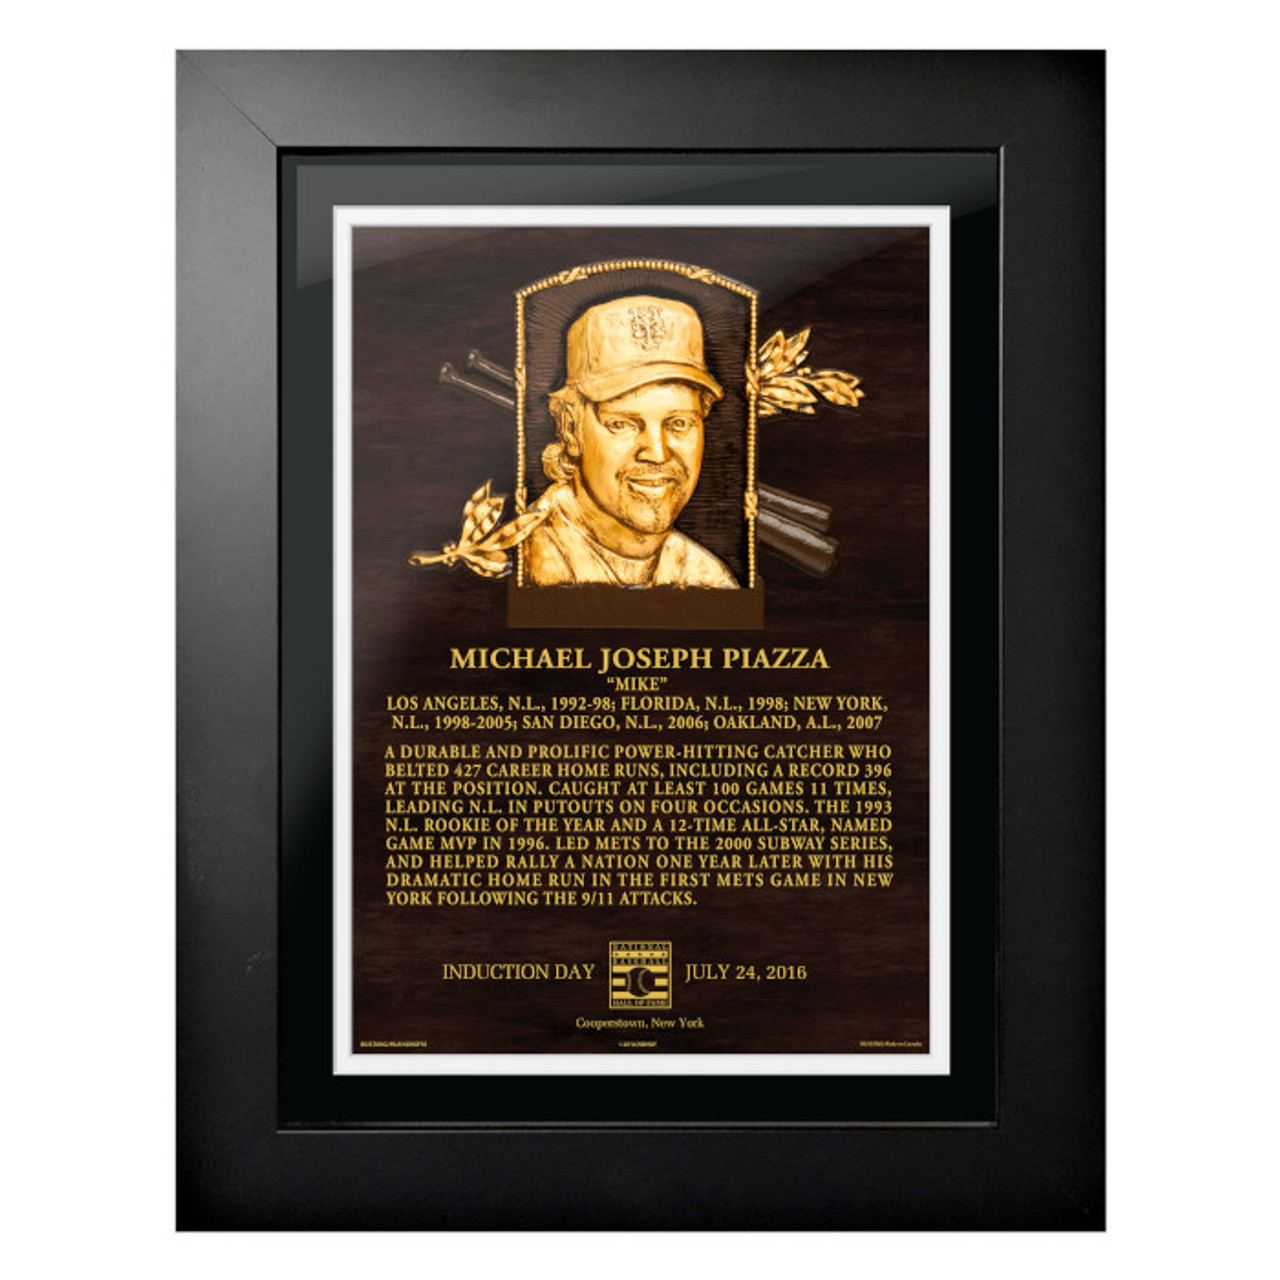 Mike Piazza Baseball Hall of Fame 18 x 14 Framed Plaque Art